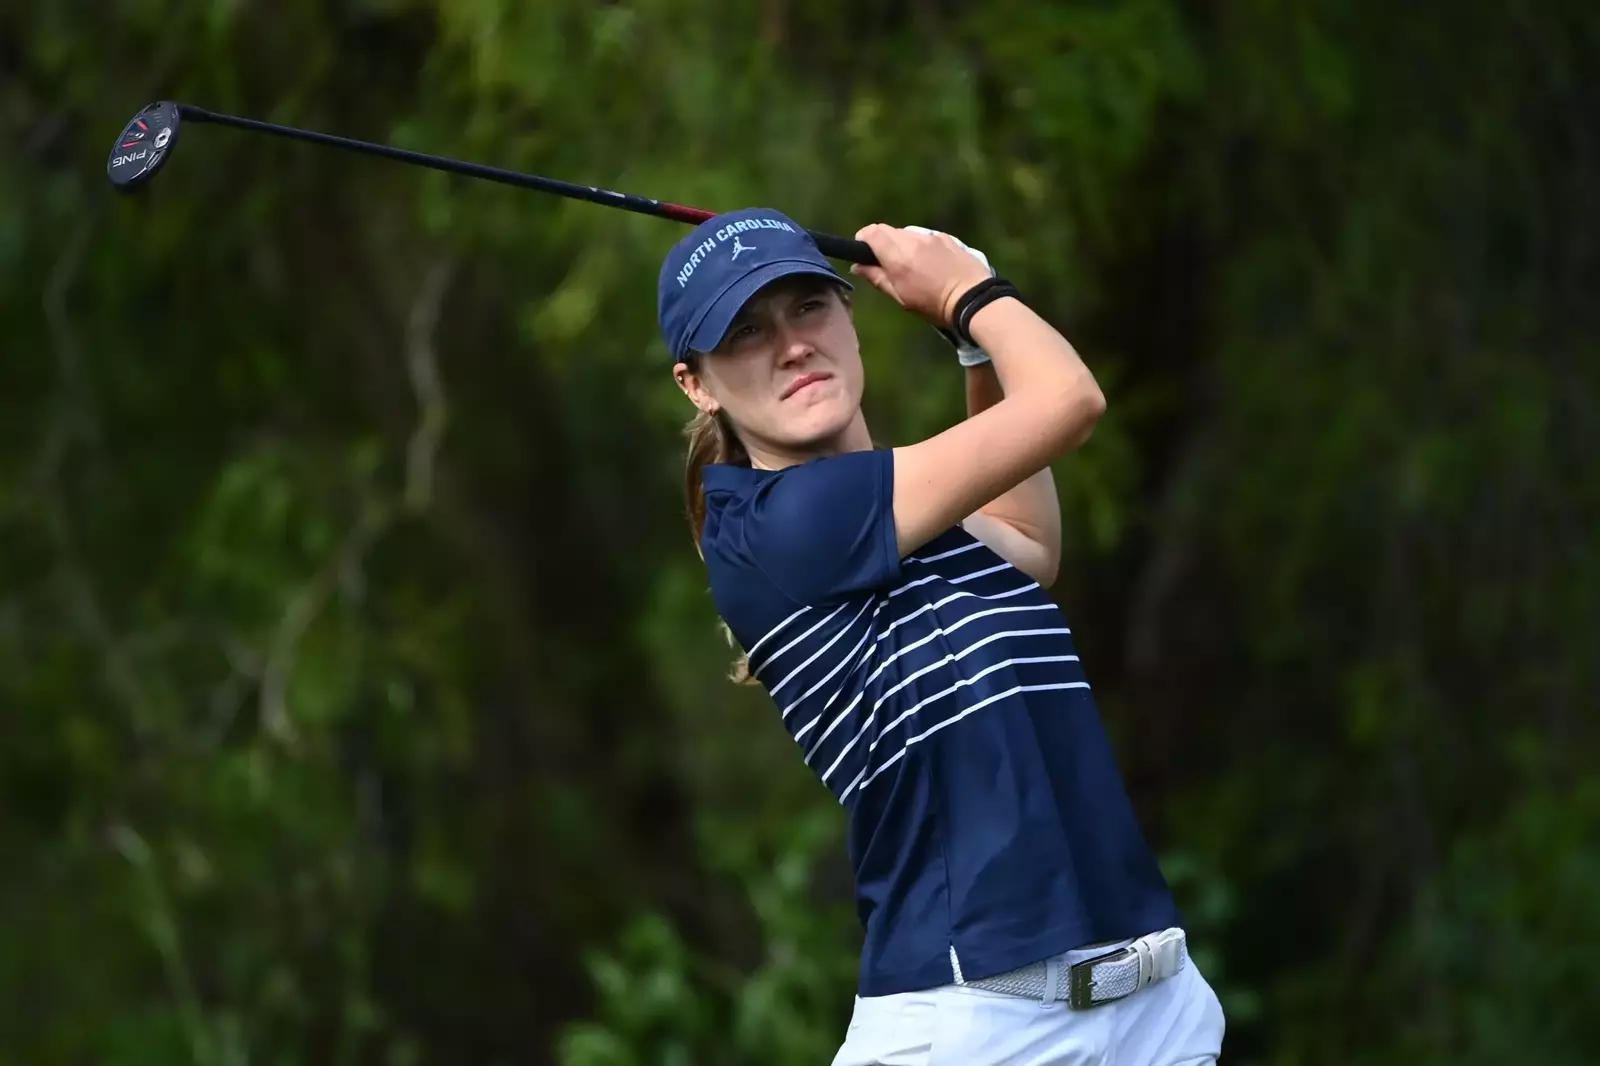 UNC's Kayla Smith Qualifies For Final Round At NCAA Golf Championship